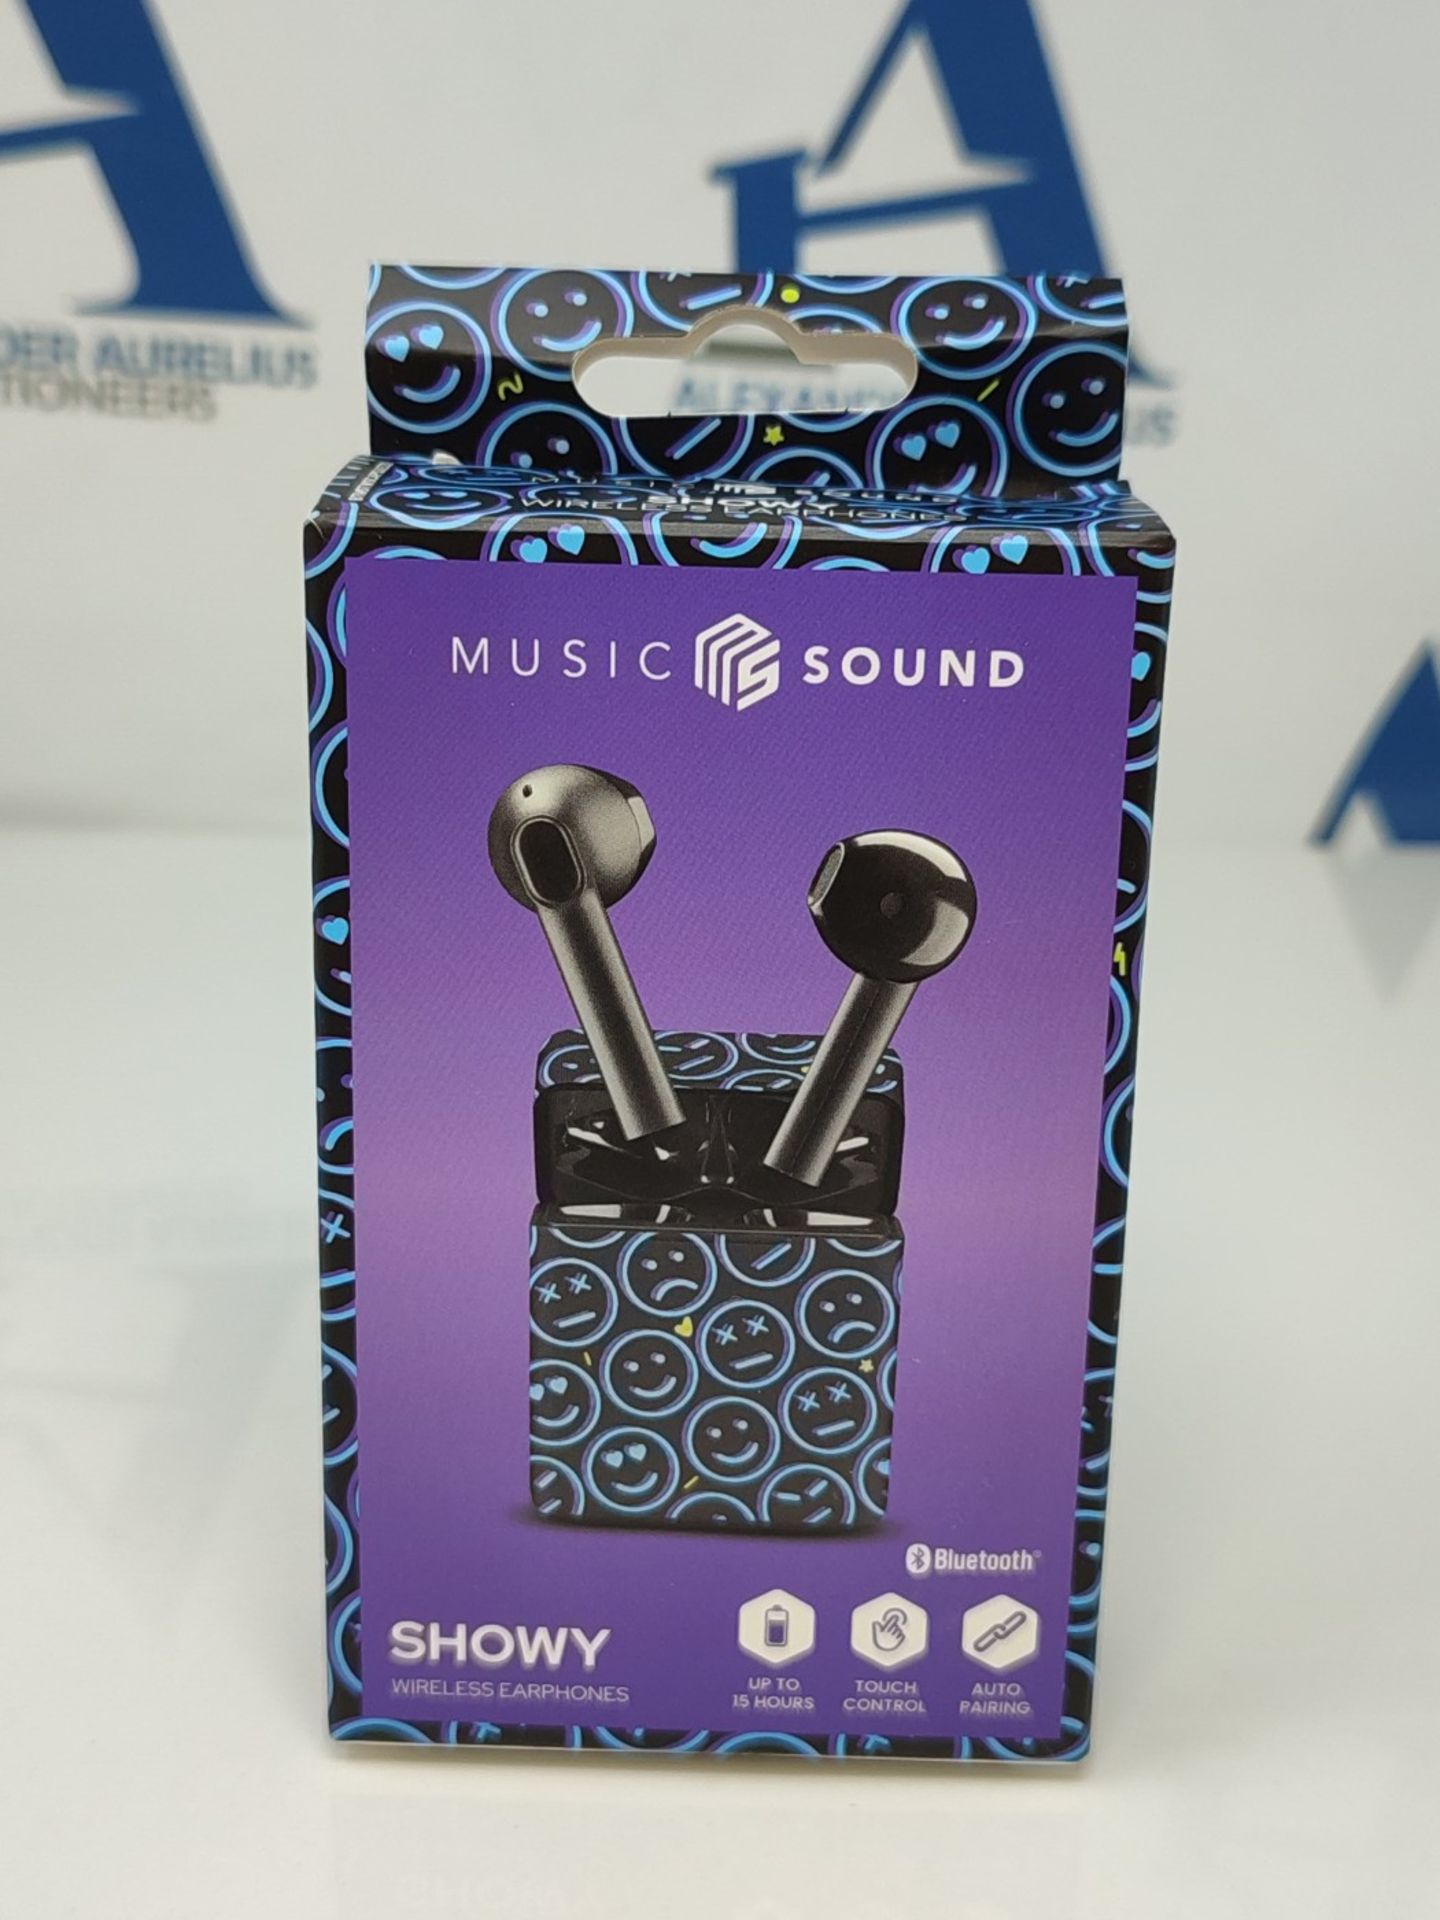 Music Sound - SHOWY - TWS Bluetooth Earbuds in Capsule, with Charging Case in various - Bild 2 aus 3